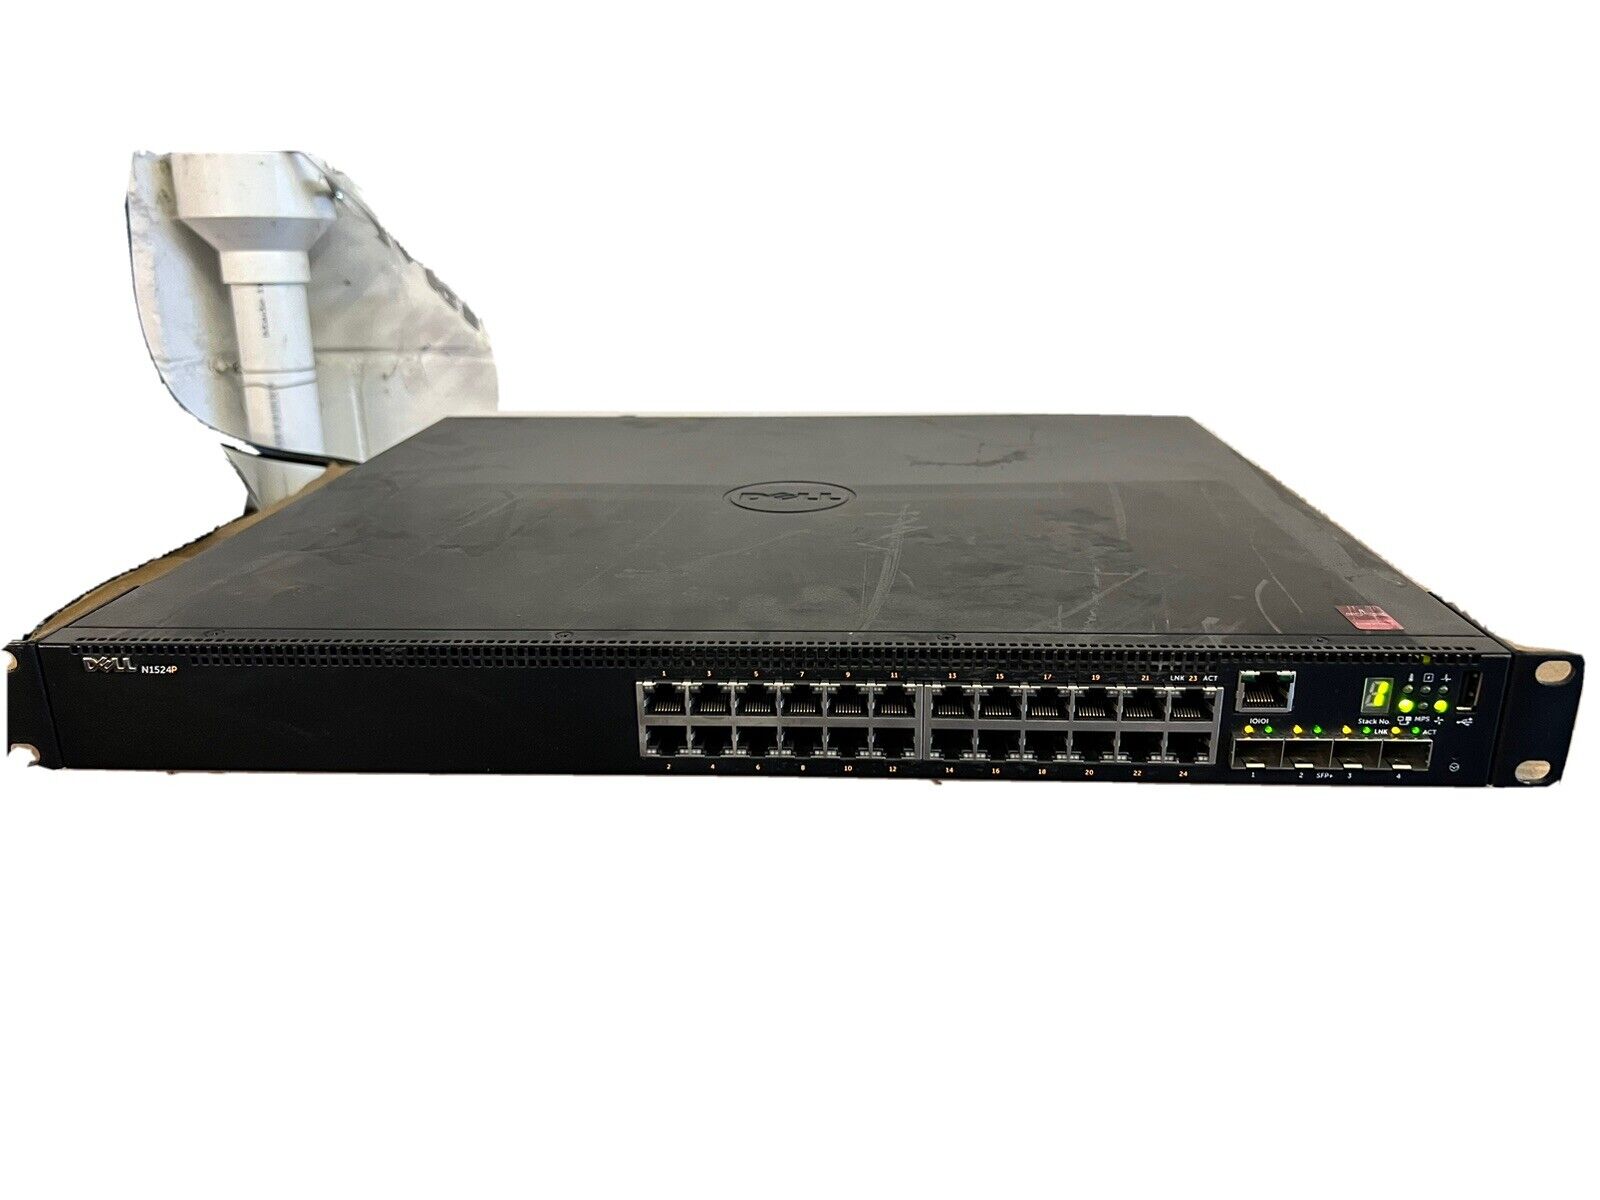 N1524P Dell N1500 Series 24-Port Gigabit PoE+ 4-Port Switch 3 Bad Ports . AS IS